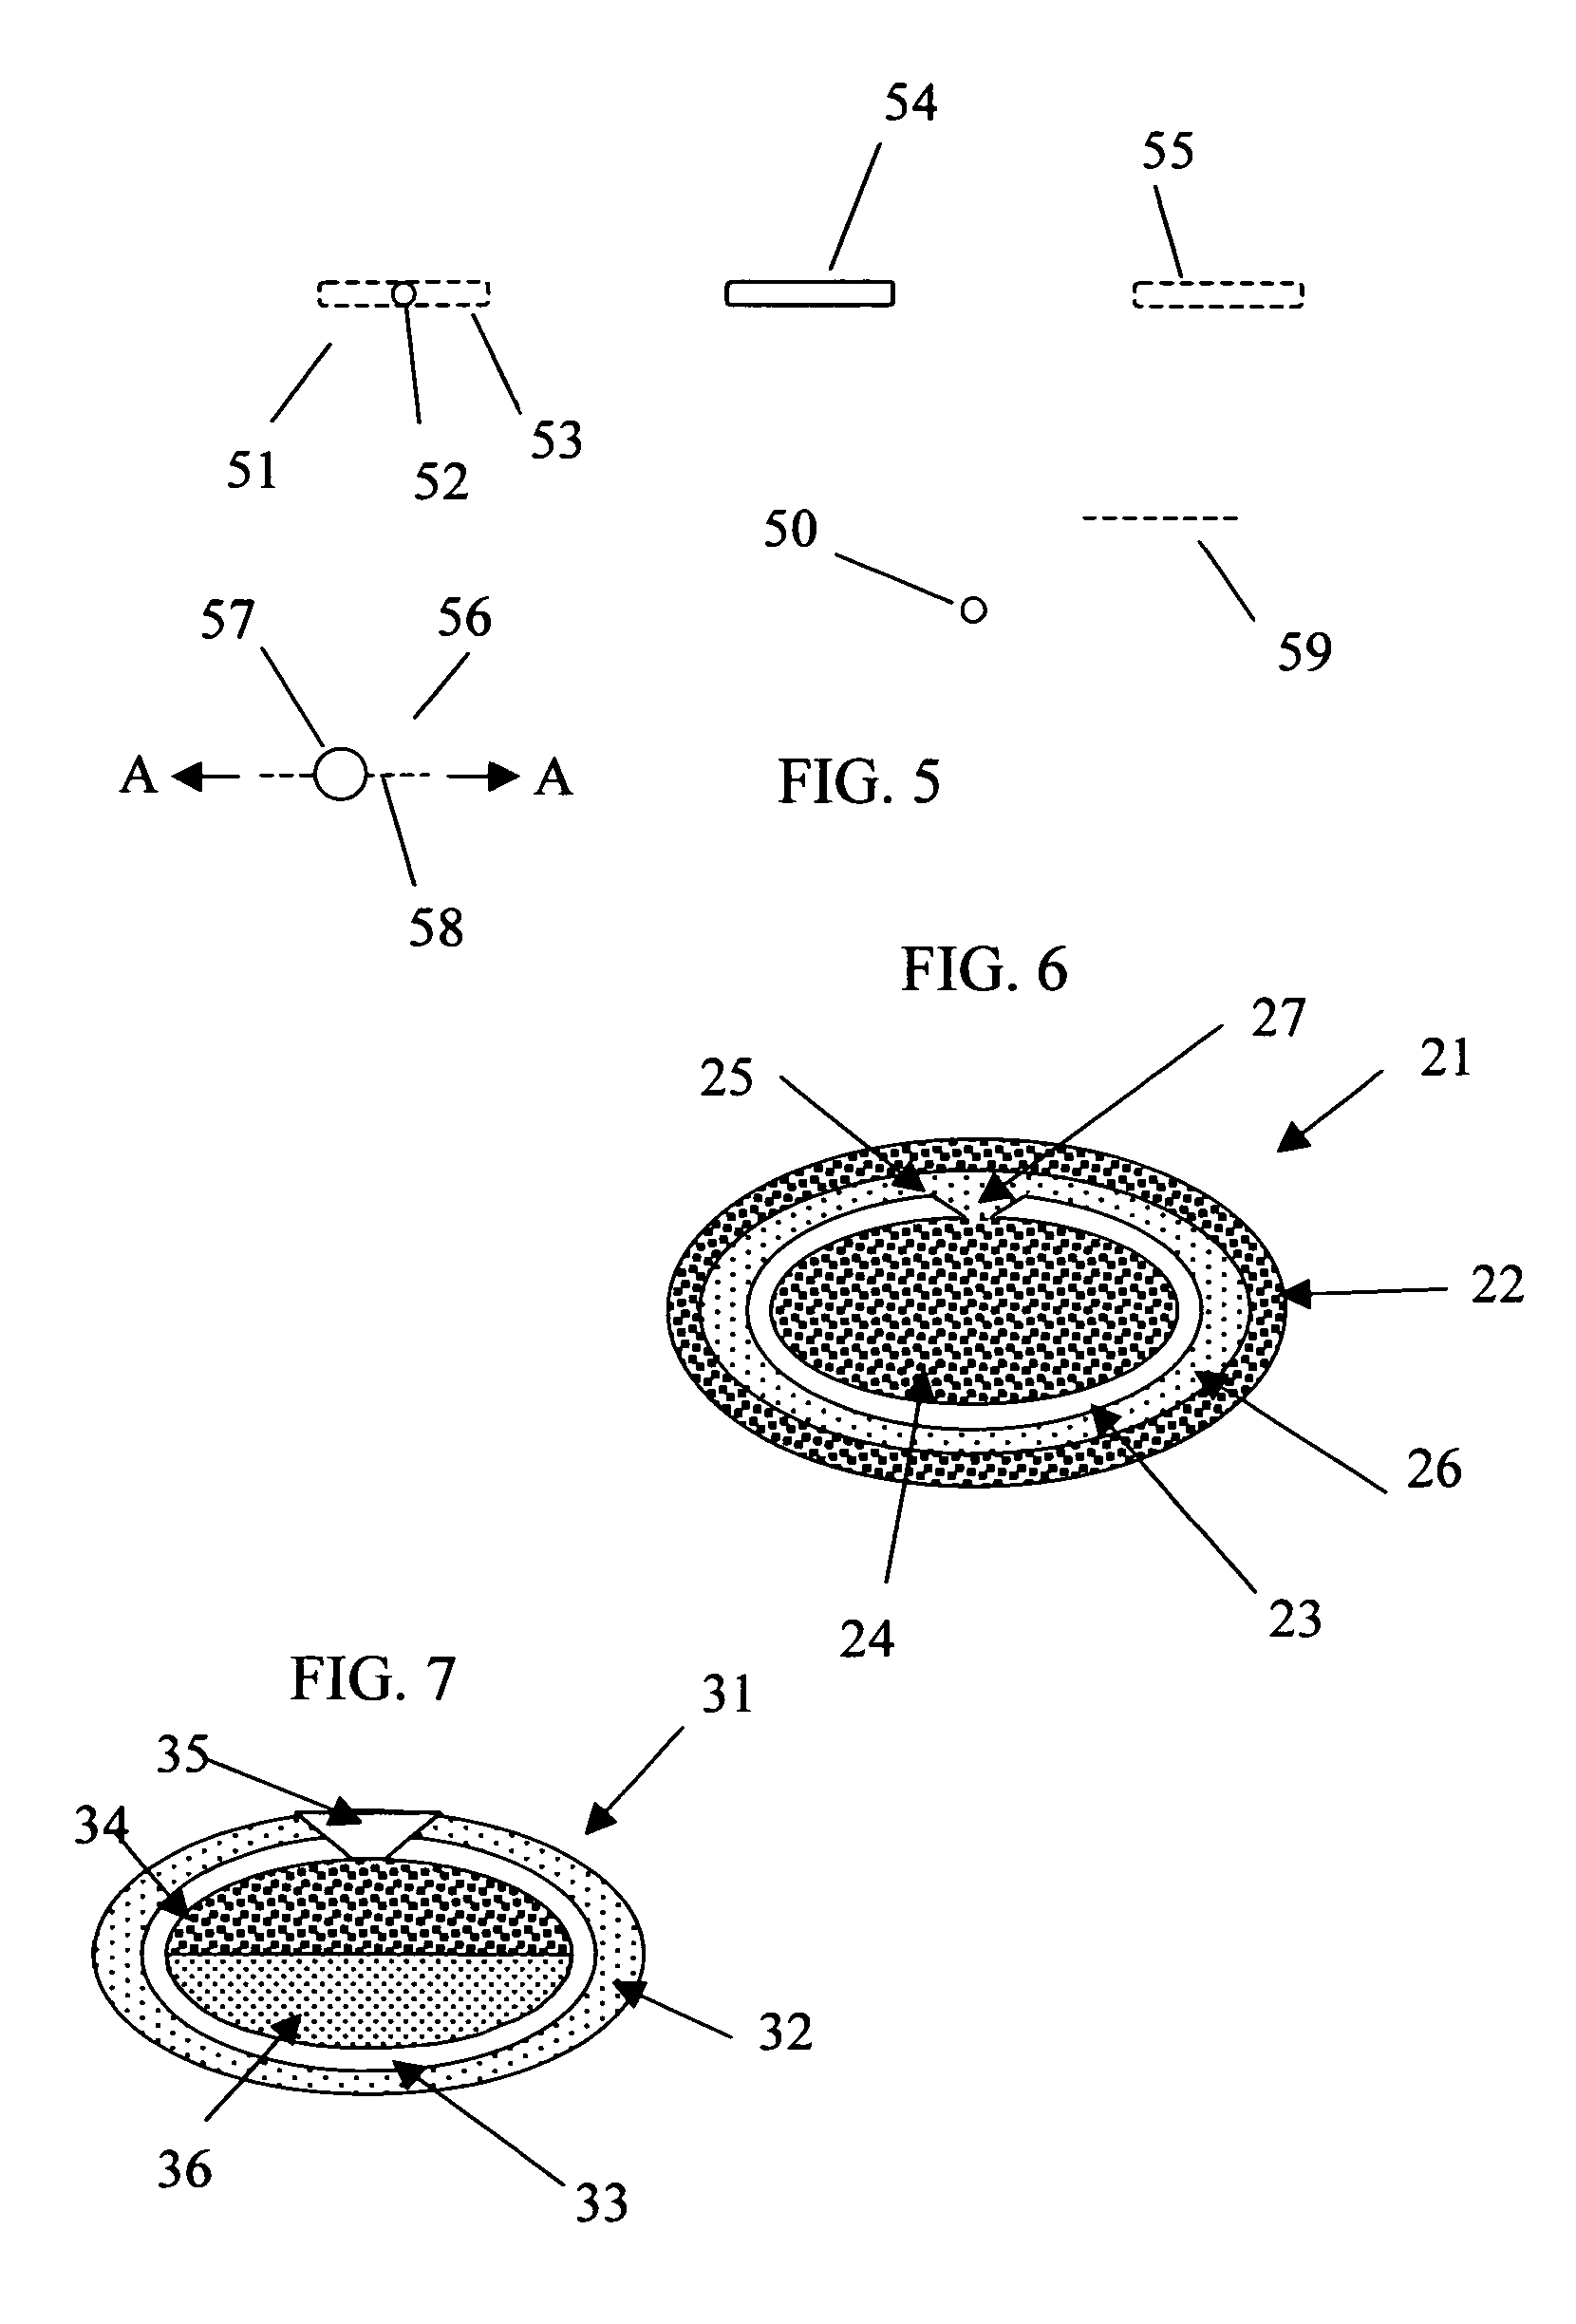 Rupturing controlled release device having a preformed passageway